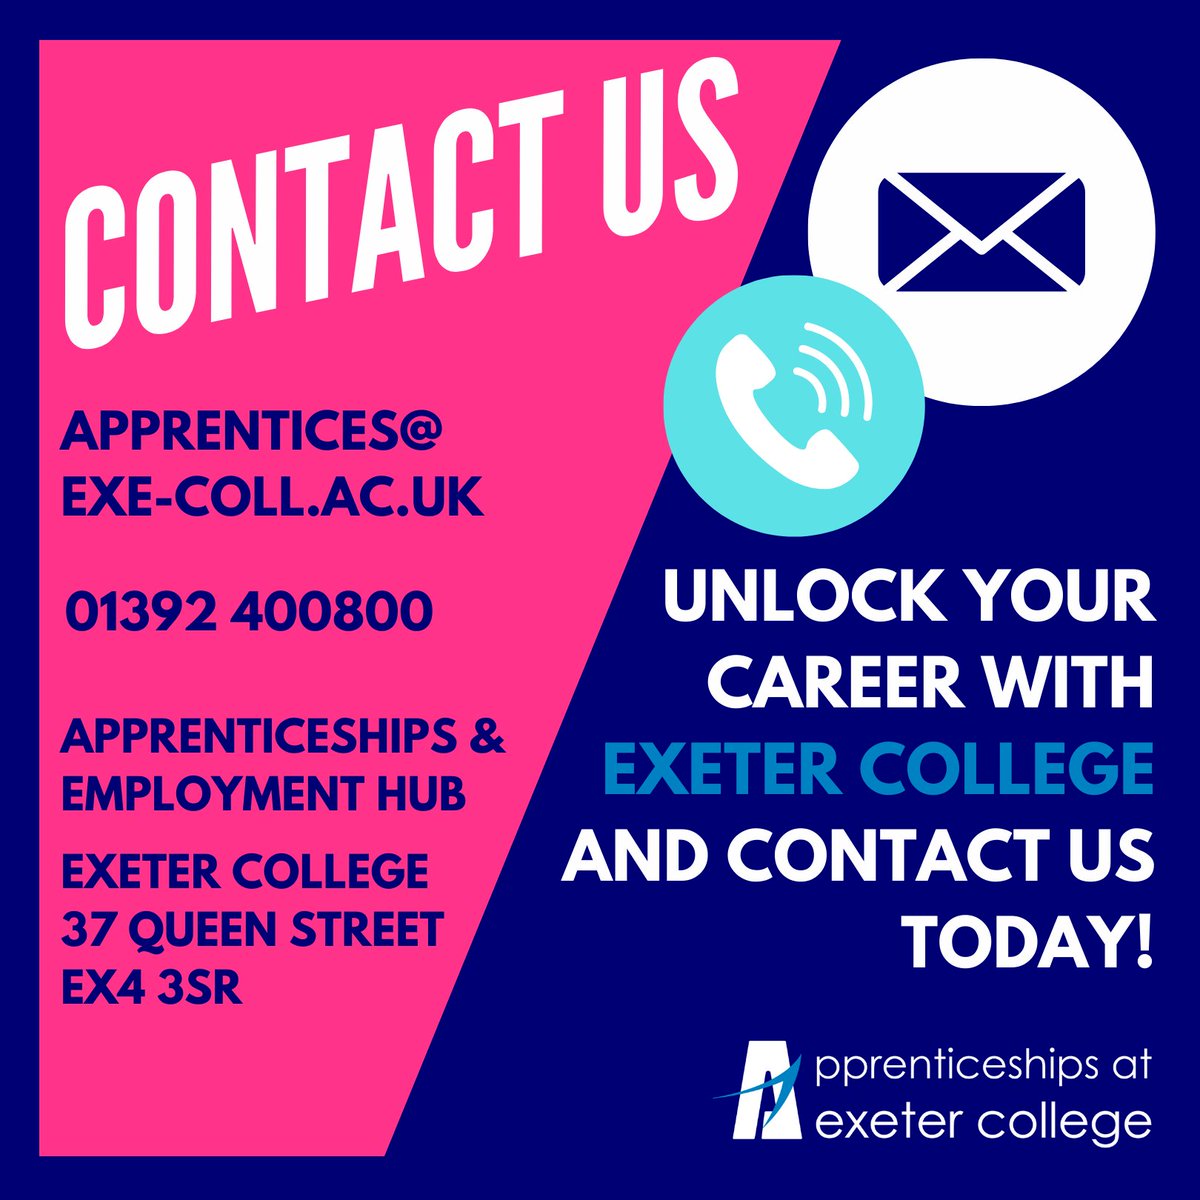 Do you have questions about apprenticeships which you would like answered? Well, why not contact our expert team in apprenticeships?! 💫😄 Contact us by phone, email or in person - we would love to help you start your career! 👍 #Apprenticeship #Apprentice #ExeterApprenticeships